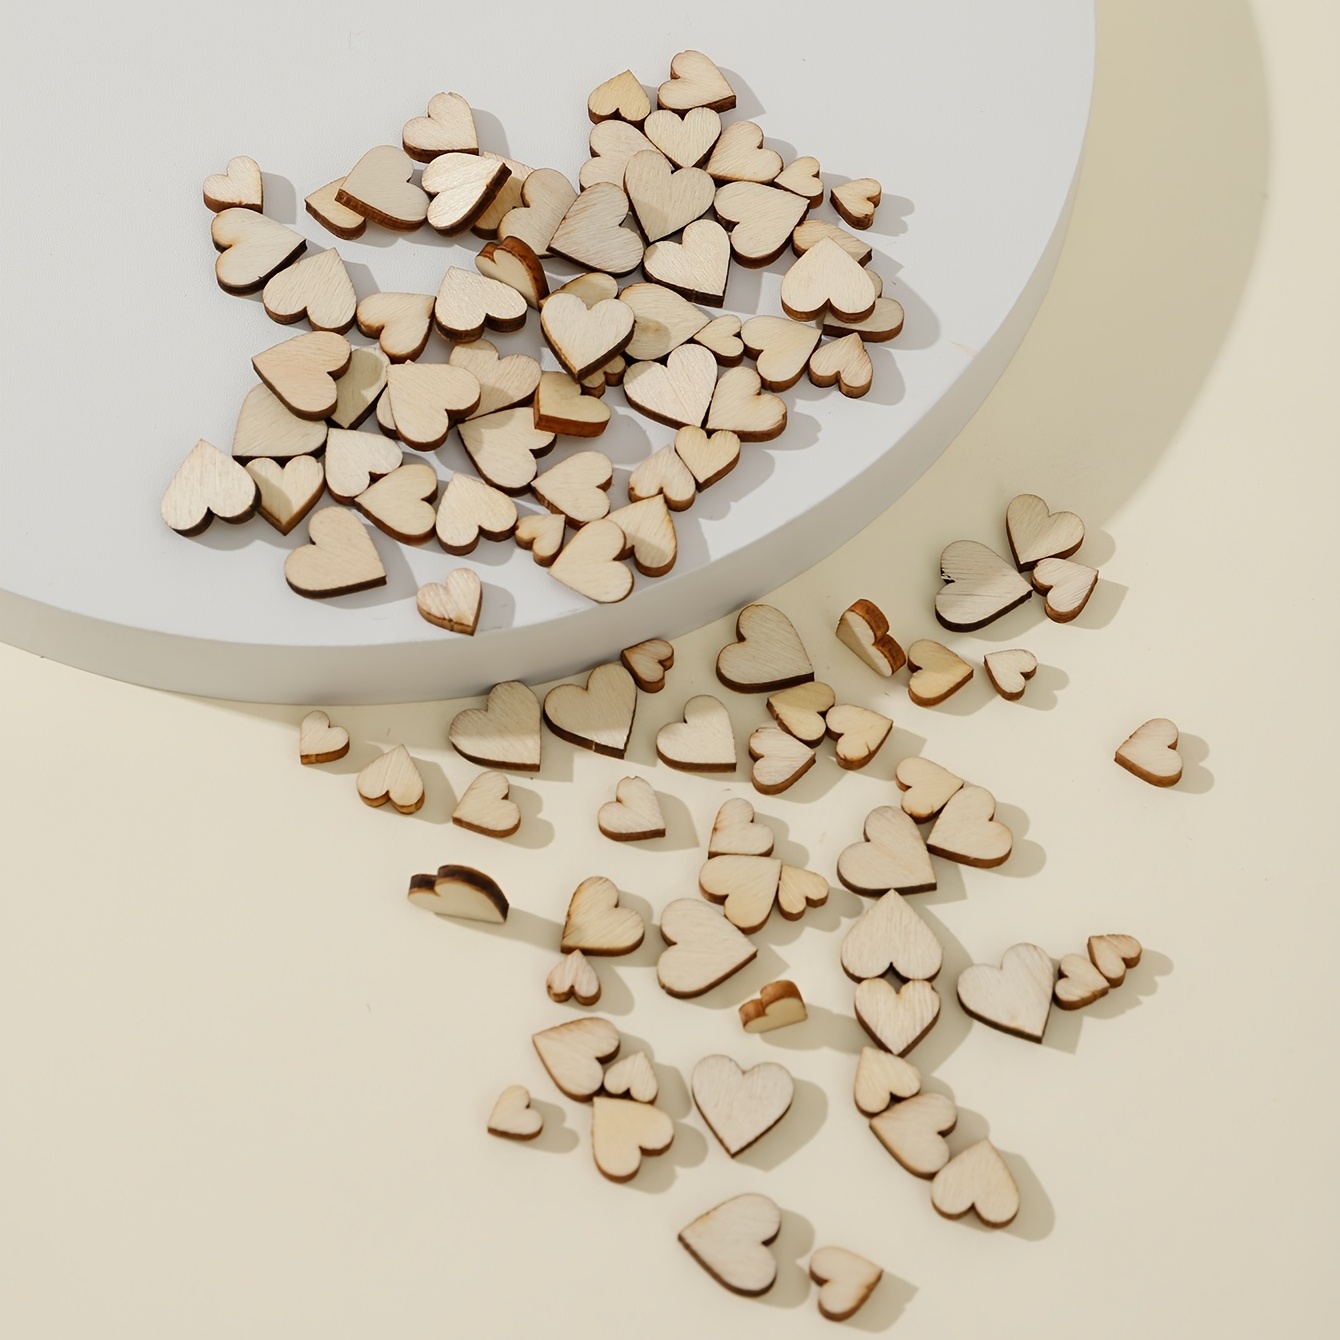  100Pcs 1 Wooden Hearts for Crafts, Small Wood Hearts